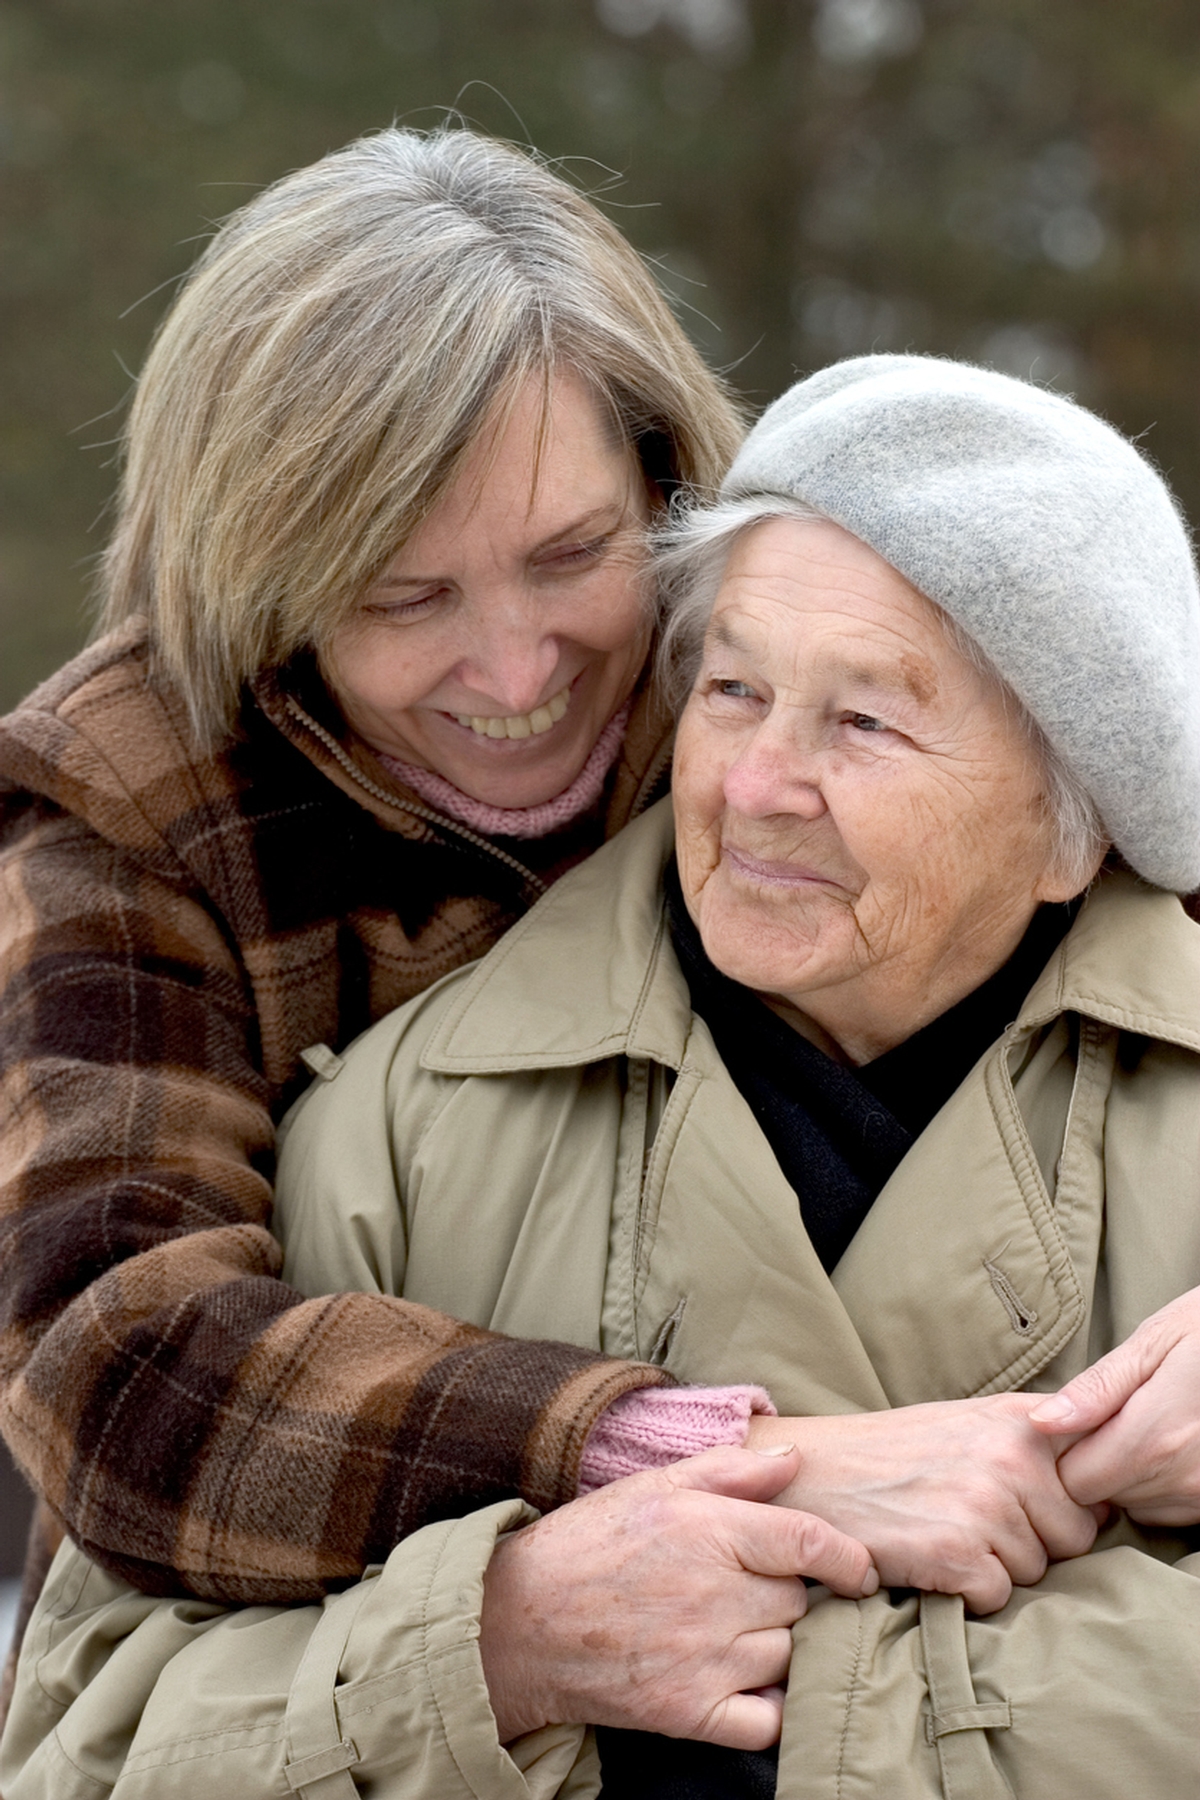 Home for the Holidays: A checklist for visiting elderly parents living alone